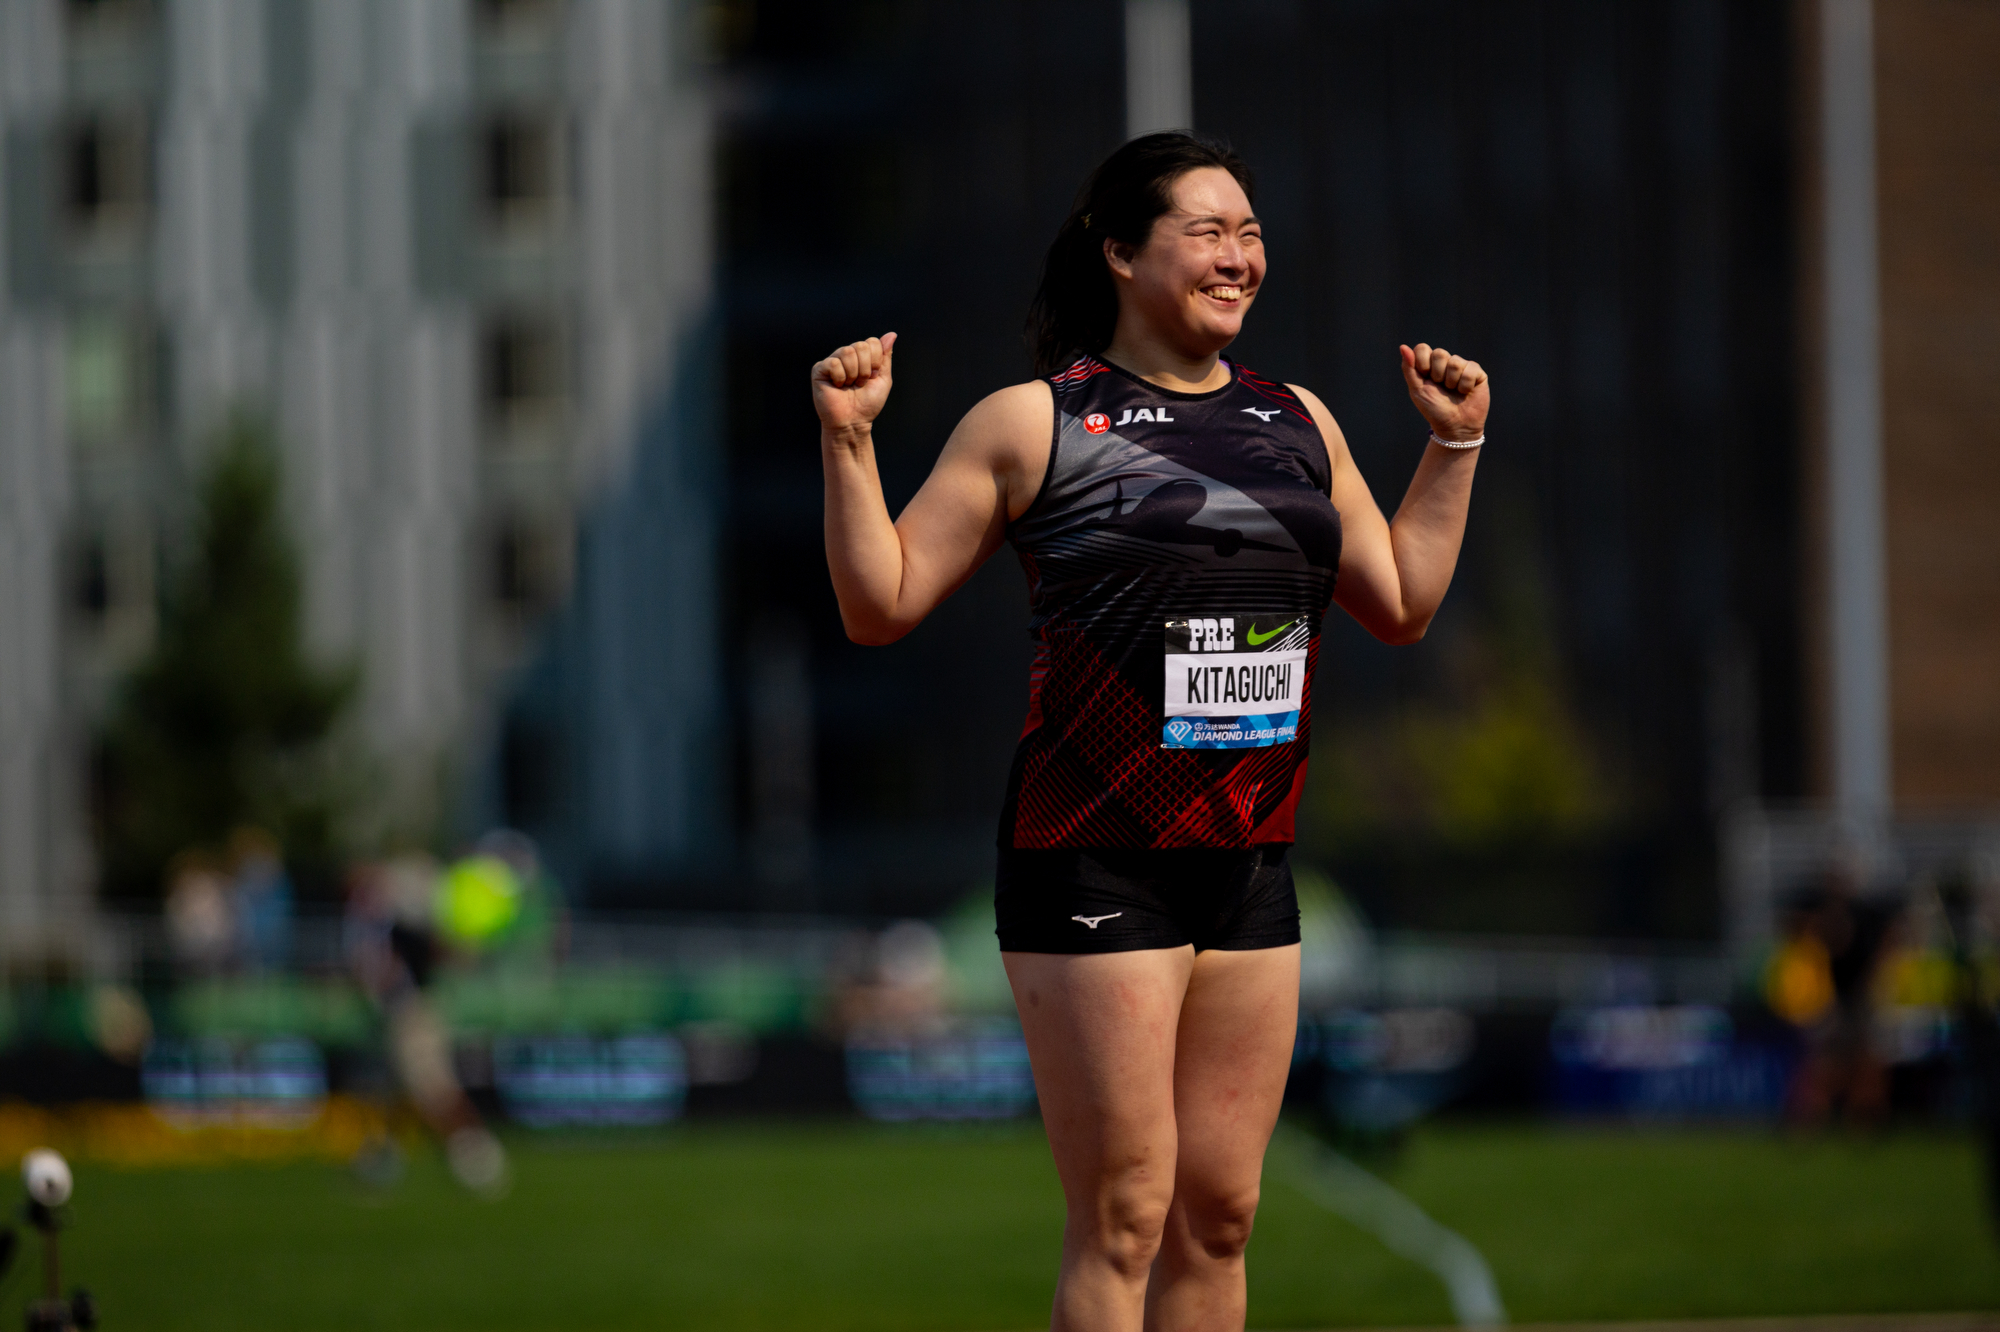 Japan's Haruka Kitaguchi celebrates after winning the women's javelin during the Prefontaine Classic track and field meet on Saturday, Sept. 16, 2023, at Hayward Field in Eugene.